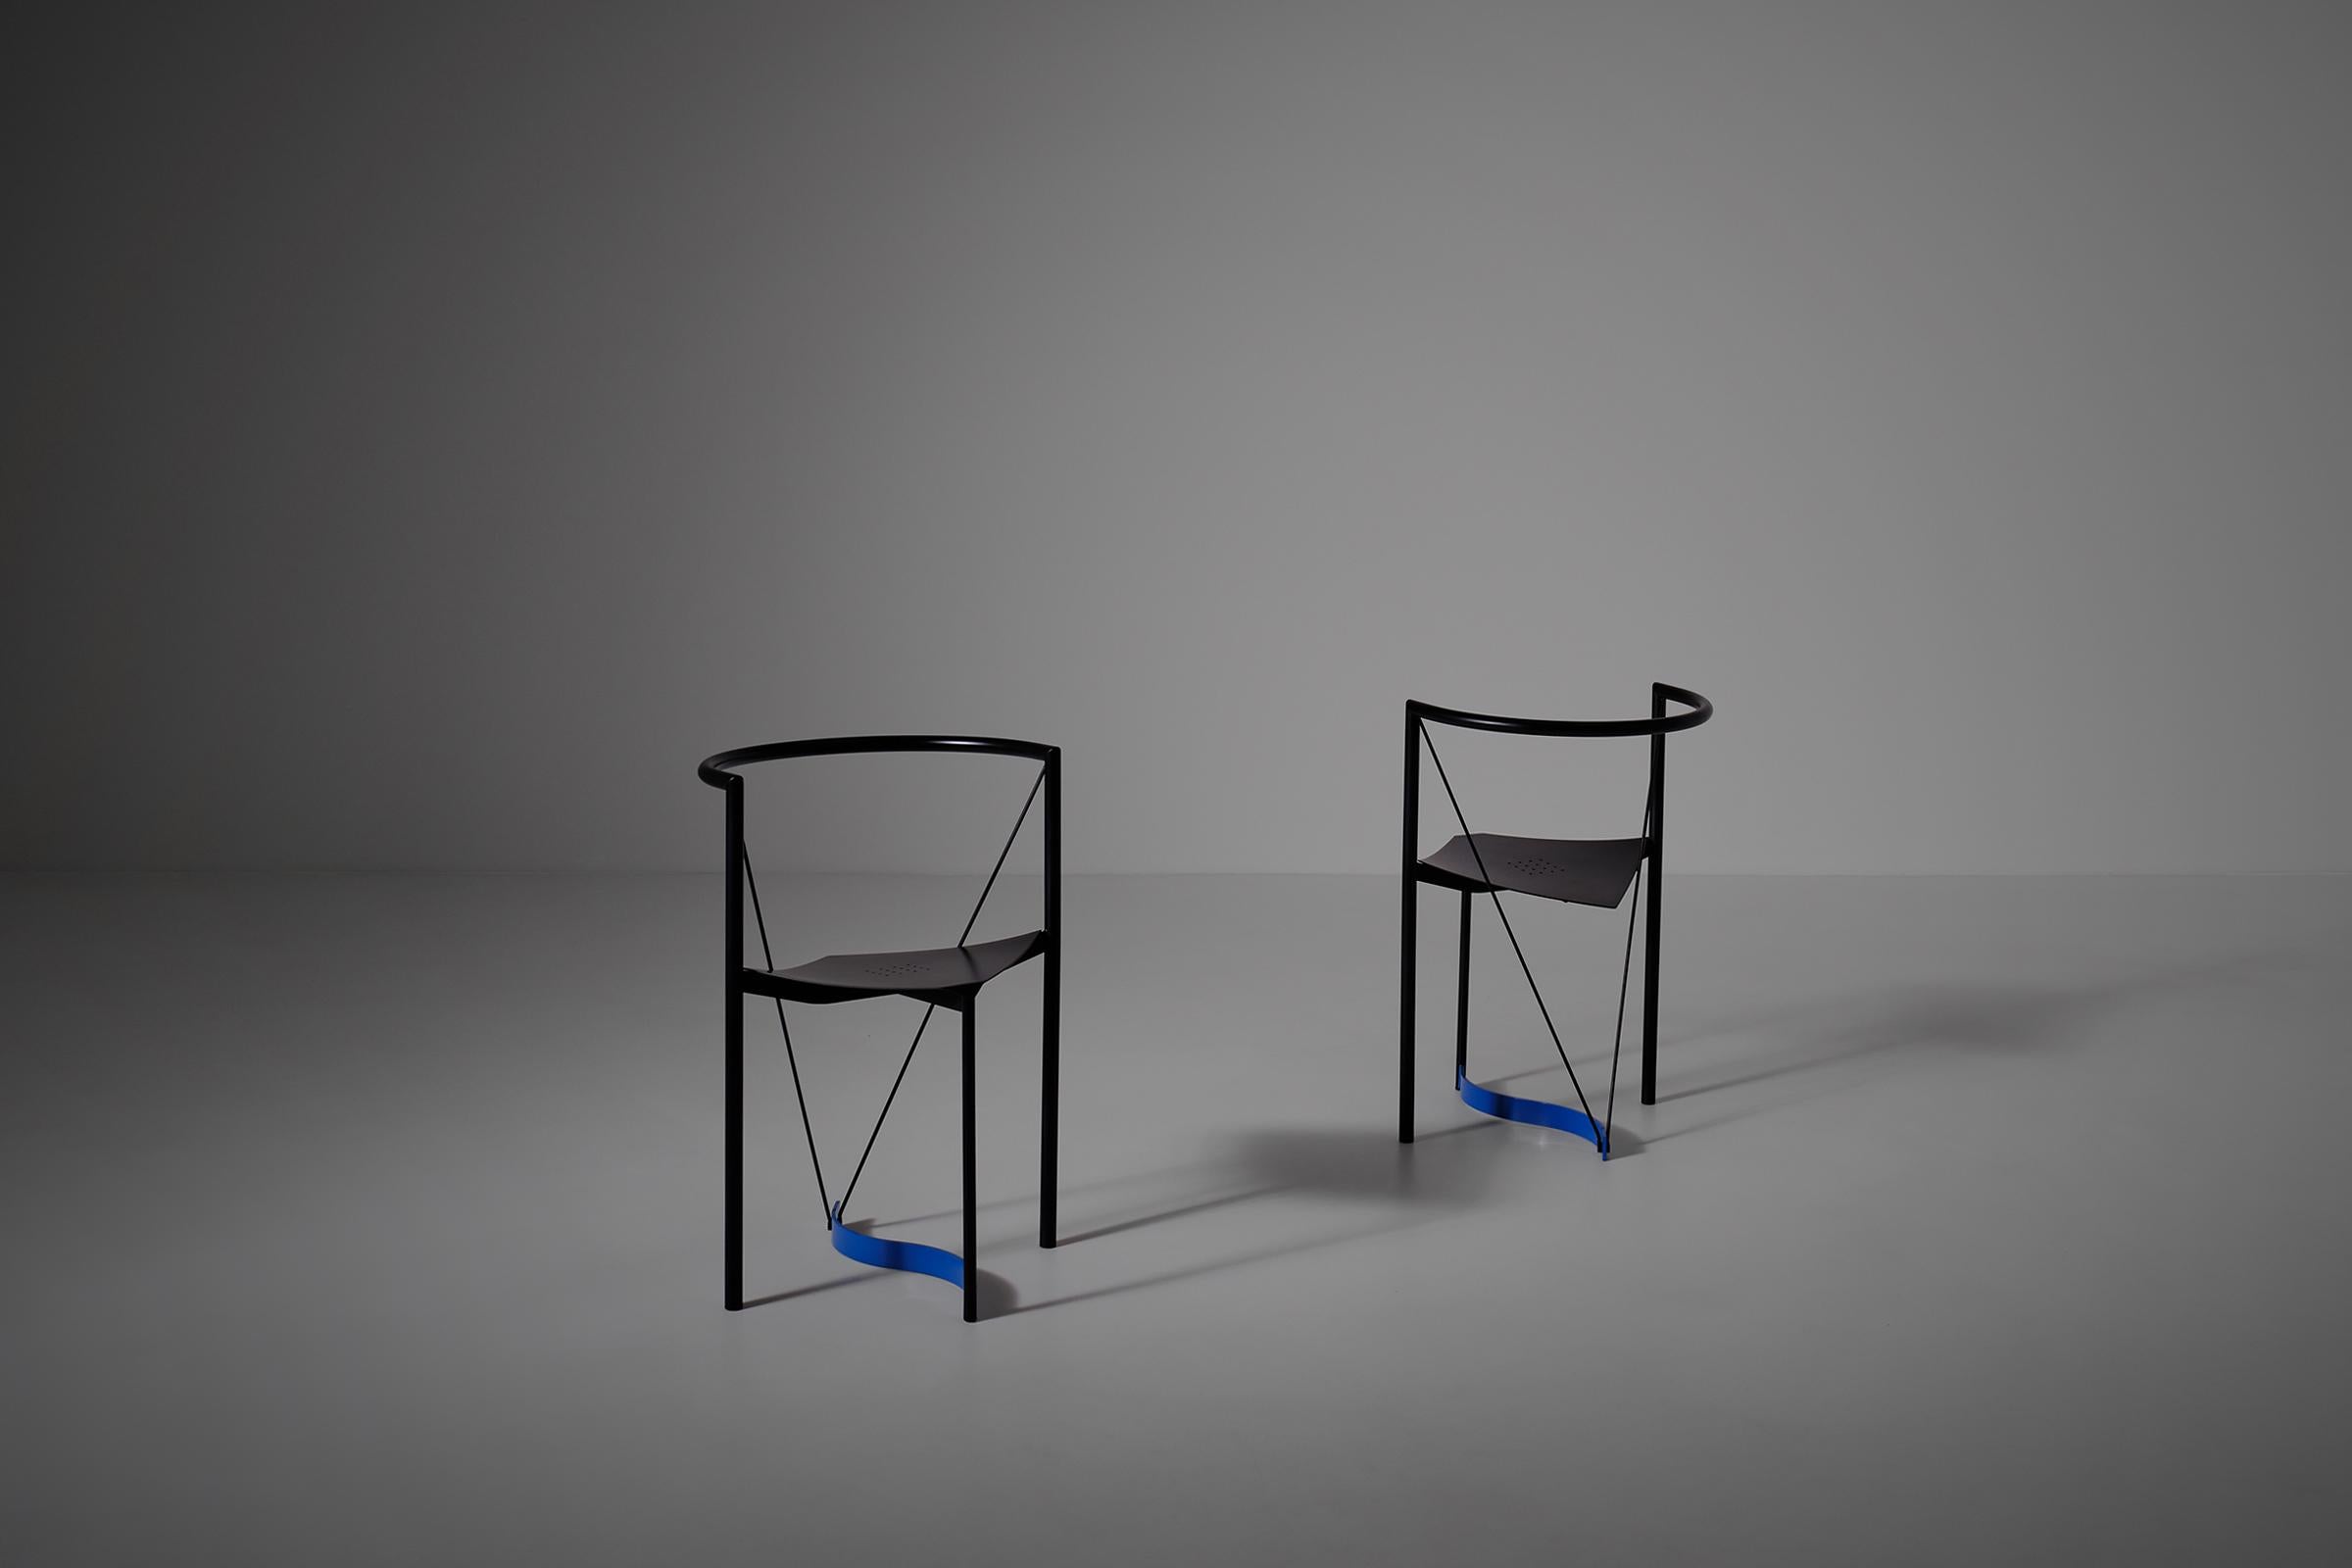 Set of two side chairs, 1980s. The chairs are constructed out of a black lacquered tubular steel frame and have a square perforated shaped seating, the curved blue connection line creates and interesting eye catching detail. The radical shapes used